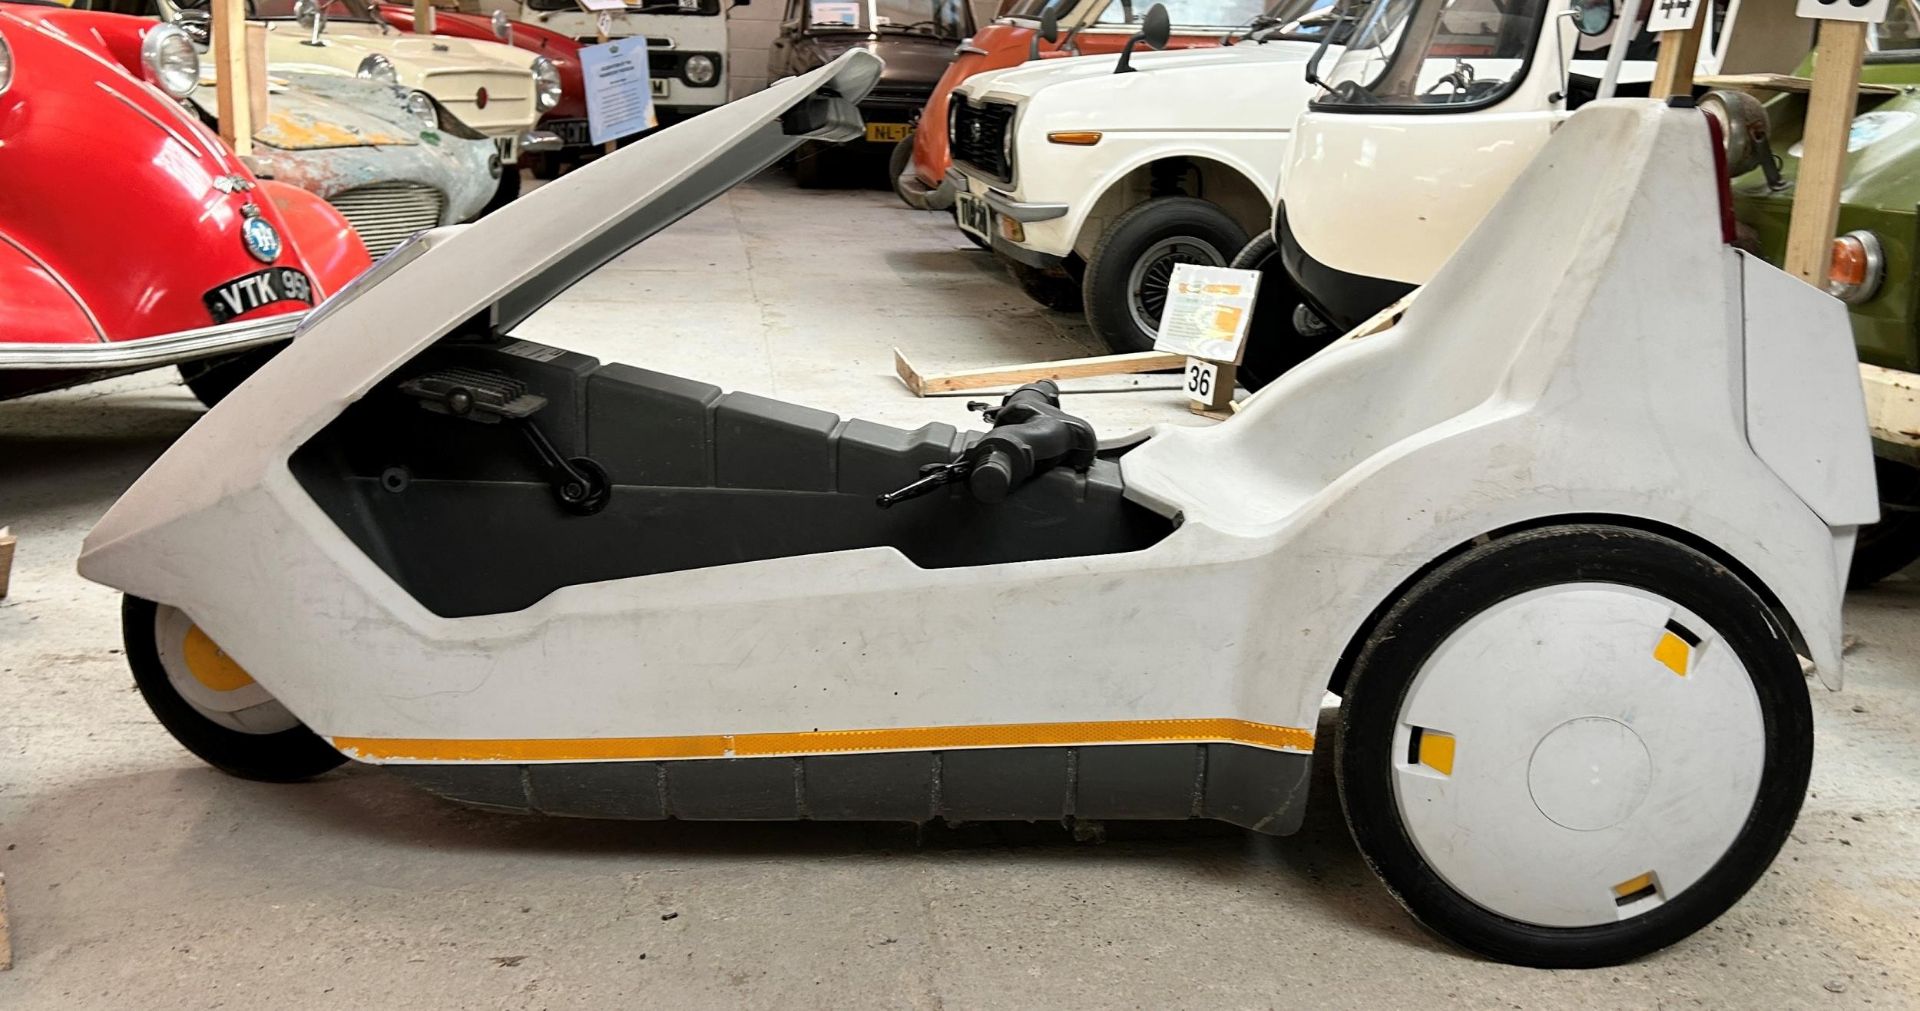 A Sinclair C5 electrically assisted pedal cycle, circa 1985 Being sold without reserve no battery